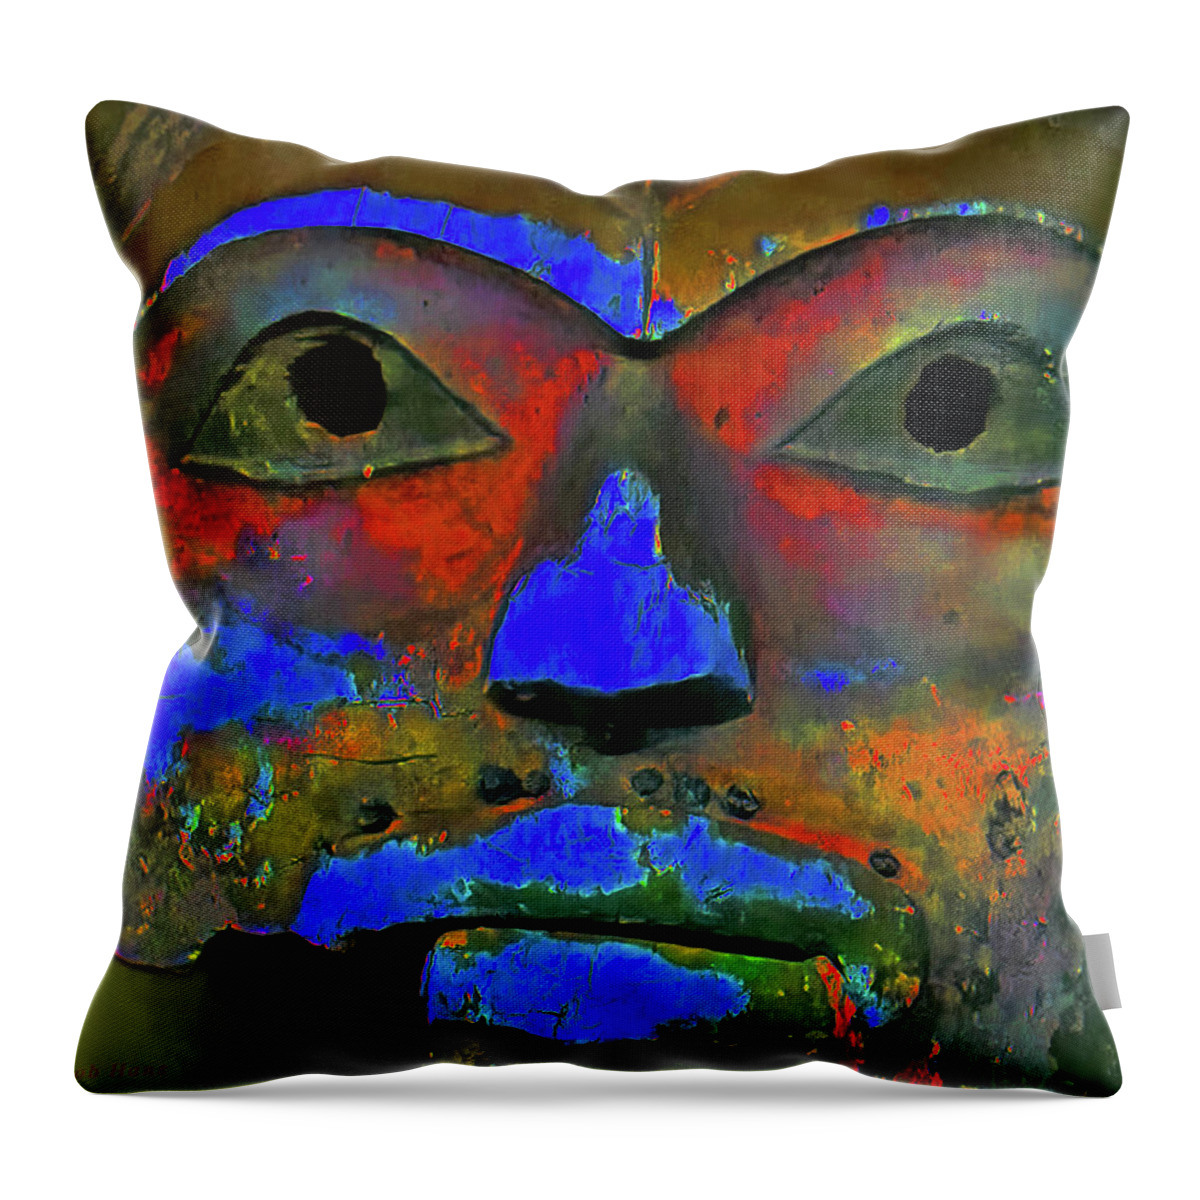 Close-up Throw Pillow featuring the photograph Broken Mask In Bronze by Rob Hans